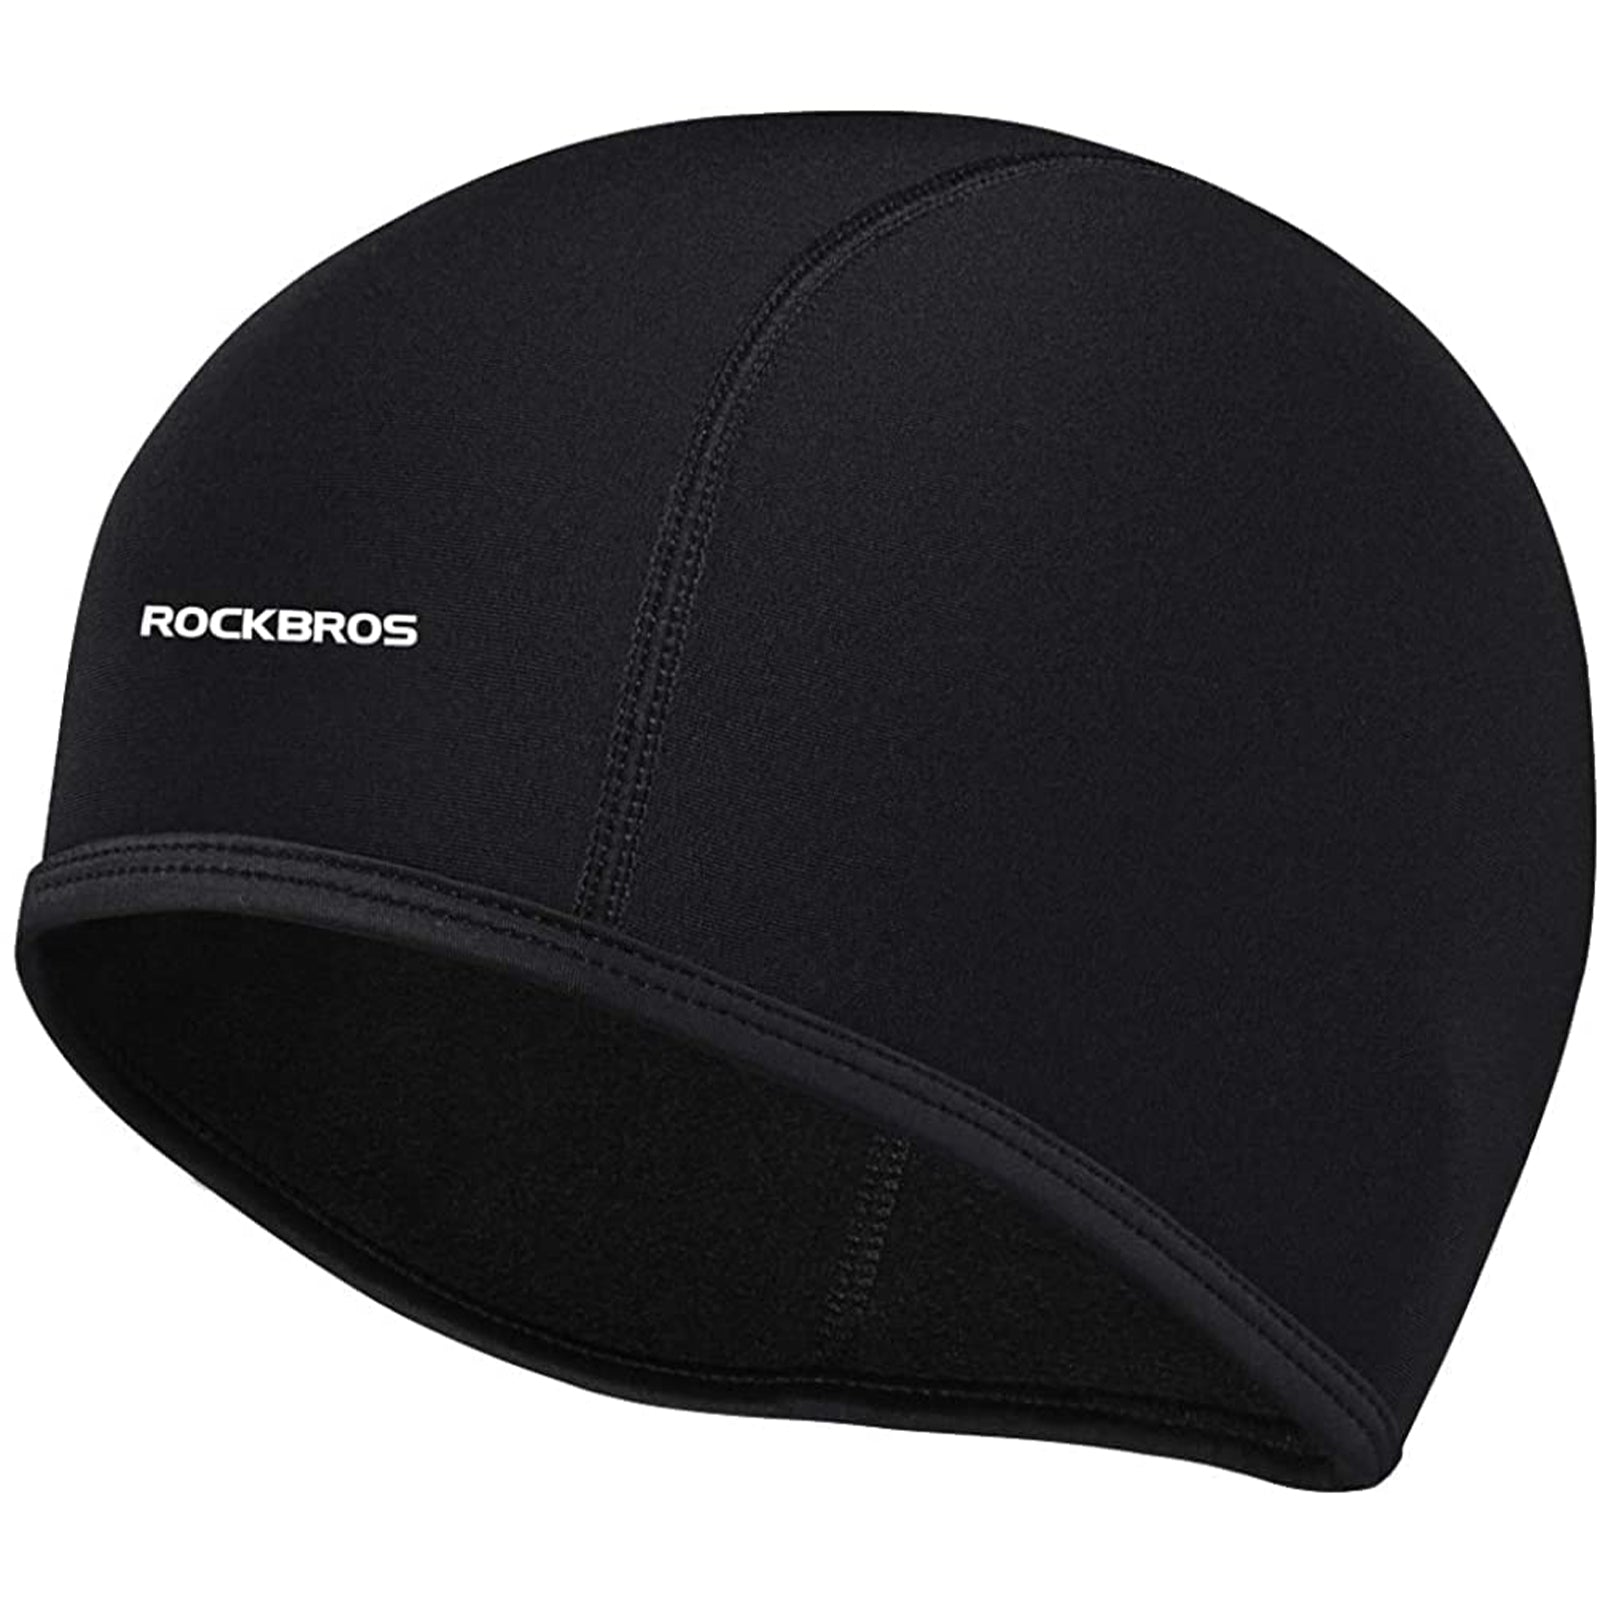 ROCKBROS Sports Beanie Skull Cap Helmet Liner Hats with Ear Covers #Style_1 PCS